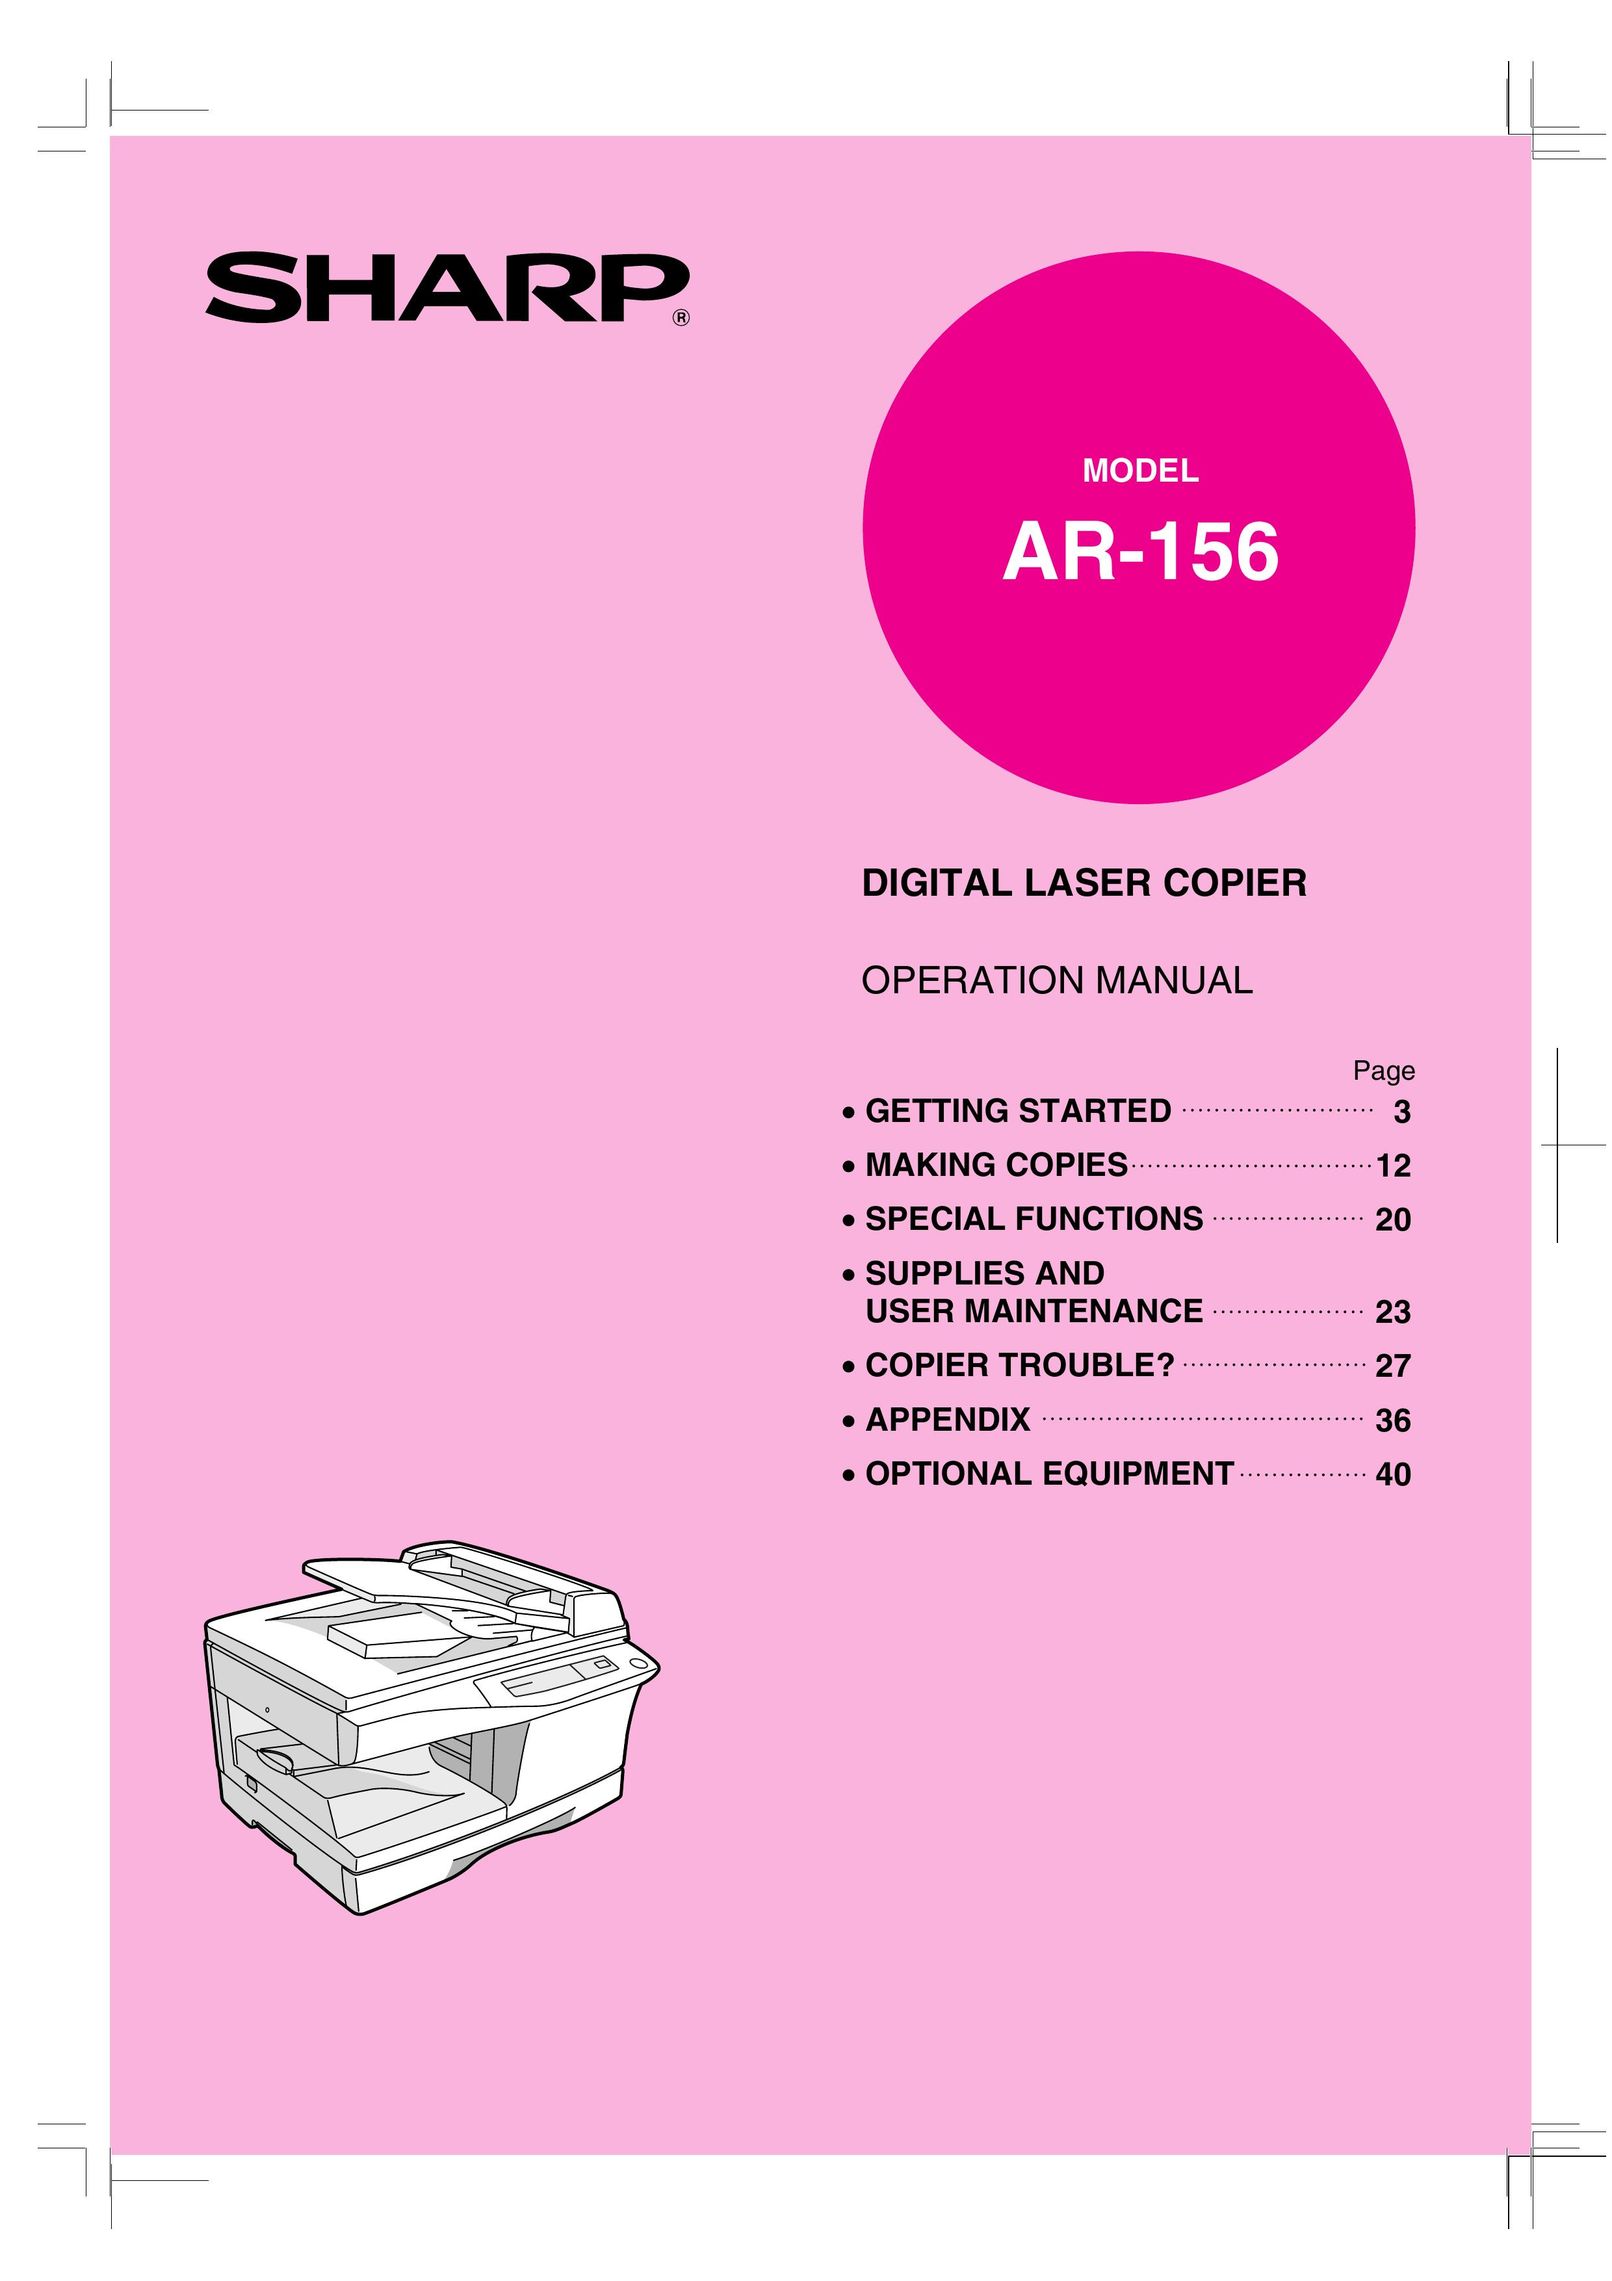 Sharp AR-156 All in One Printer User Manual